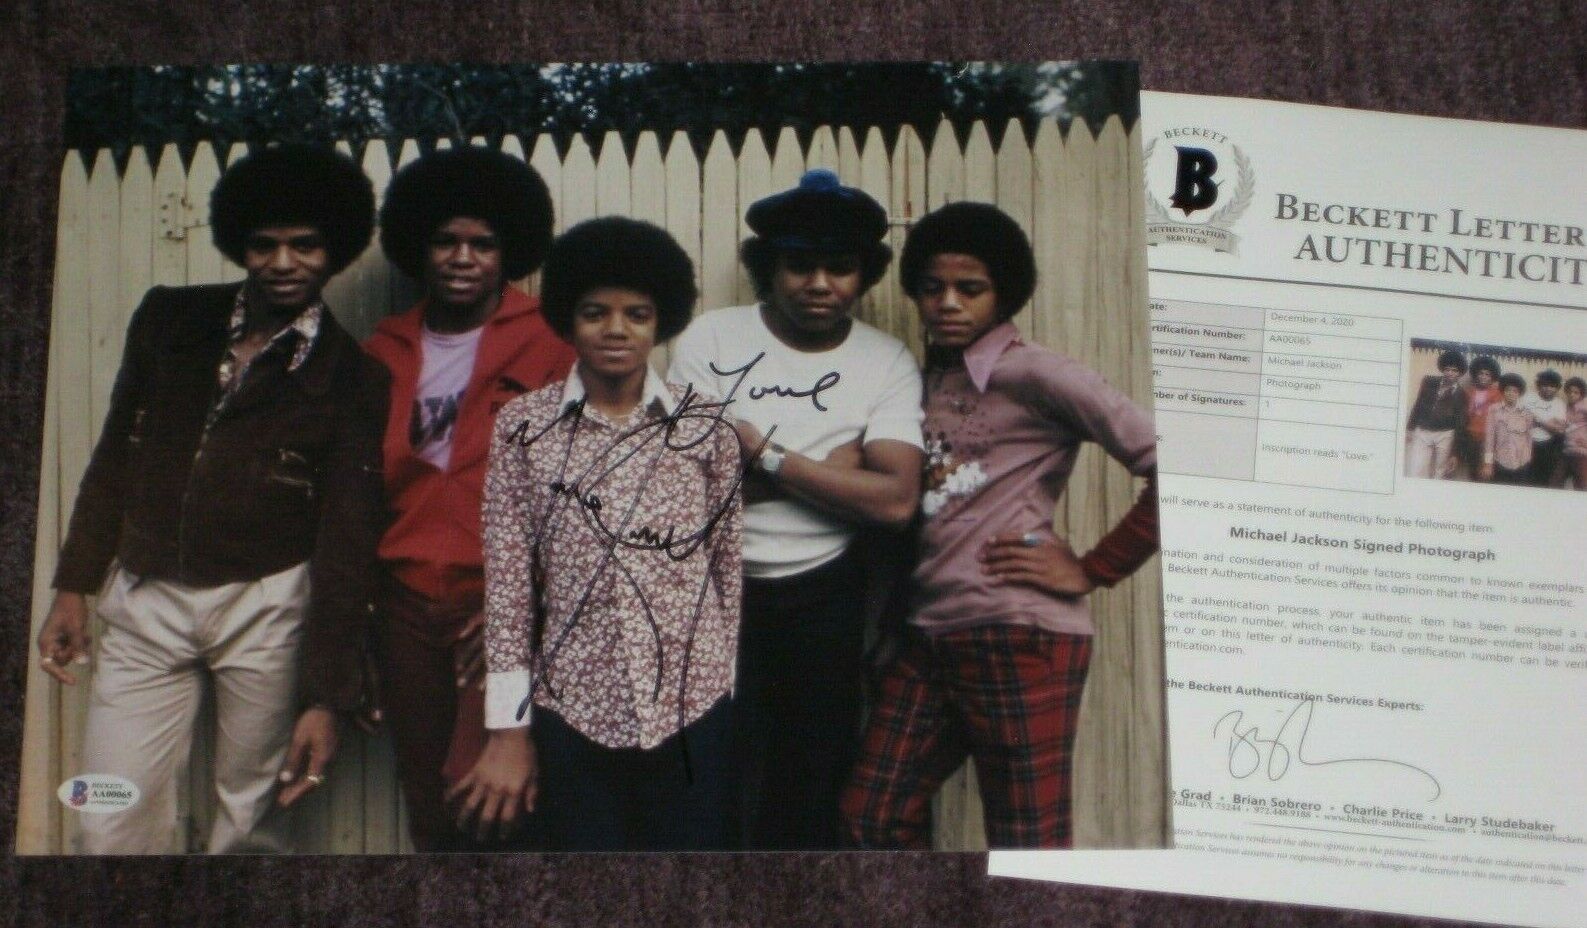 MICHAEL JACKSON Signed JACKSON 5 11x14 Photo Poster painting with Beckett LOA & Love